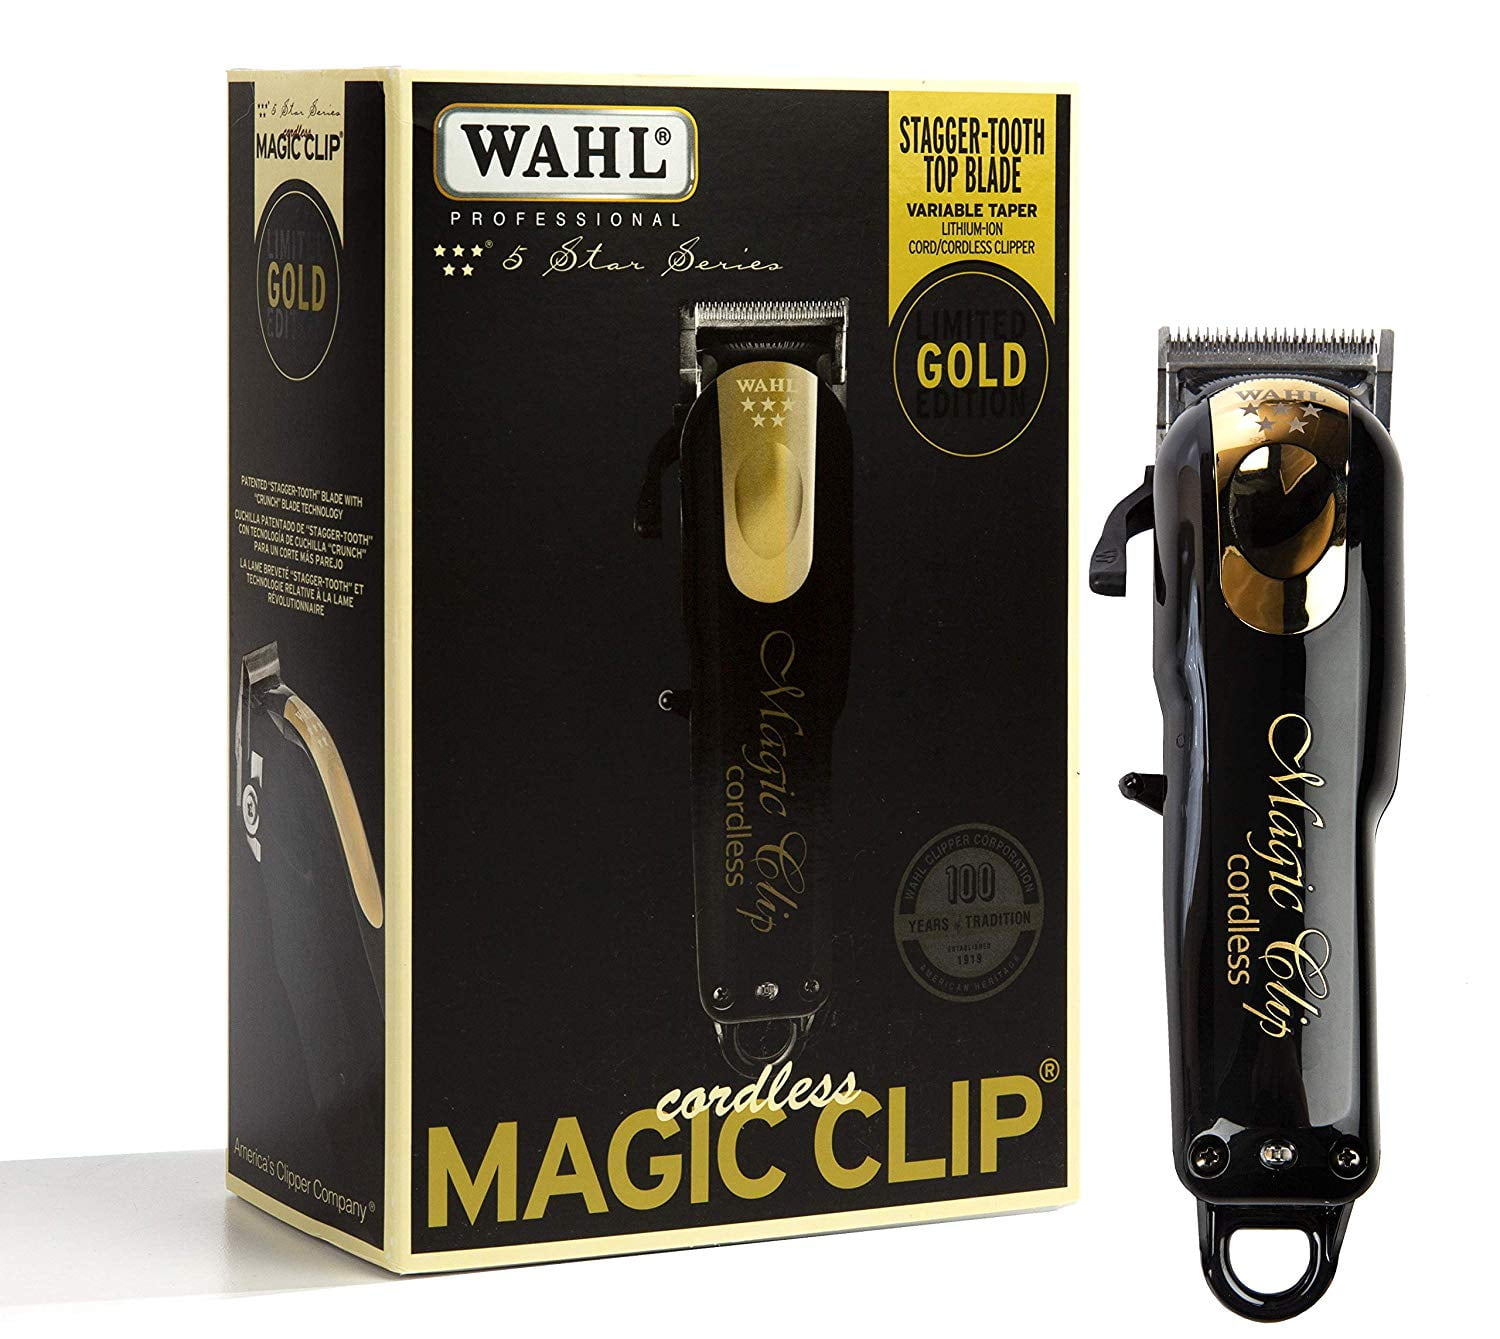 Wahl Professional 5-Star Limited Edition Black & Gold Cordless Magic Clip